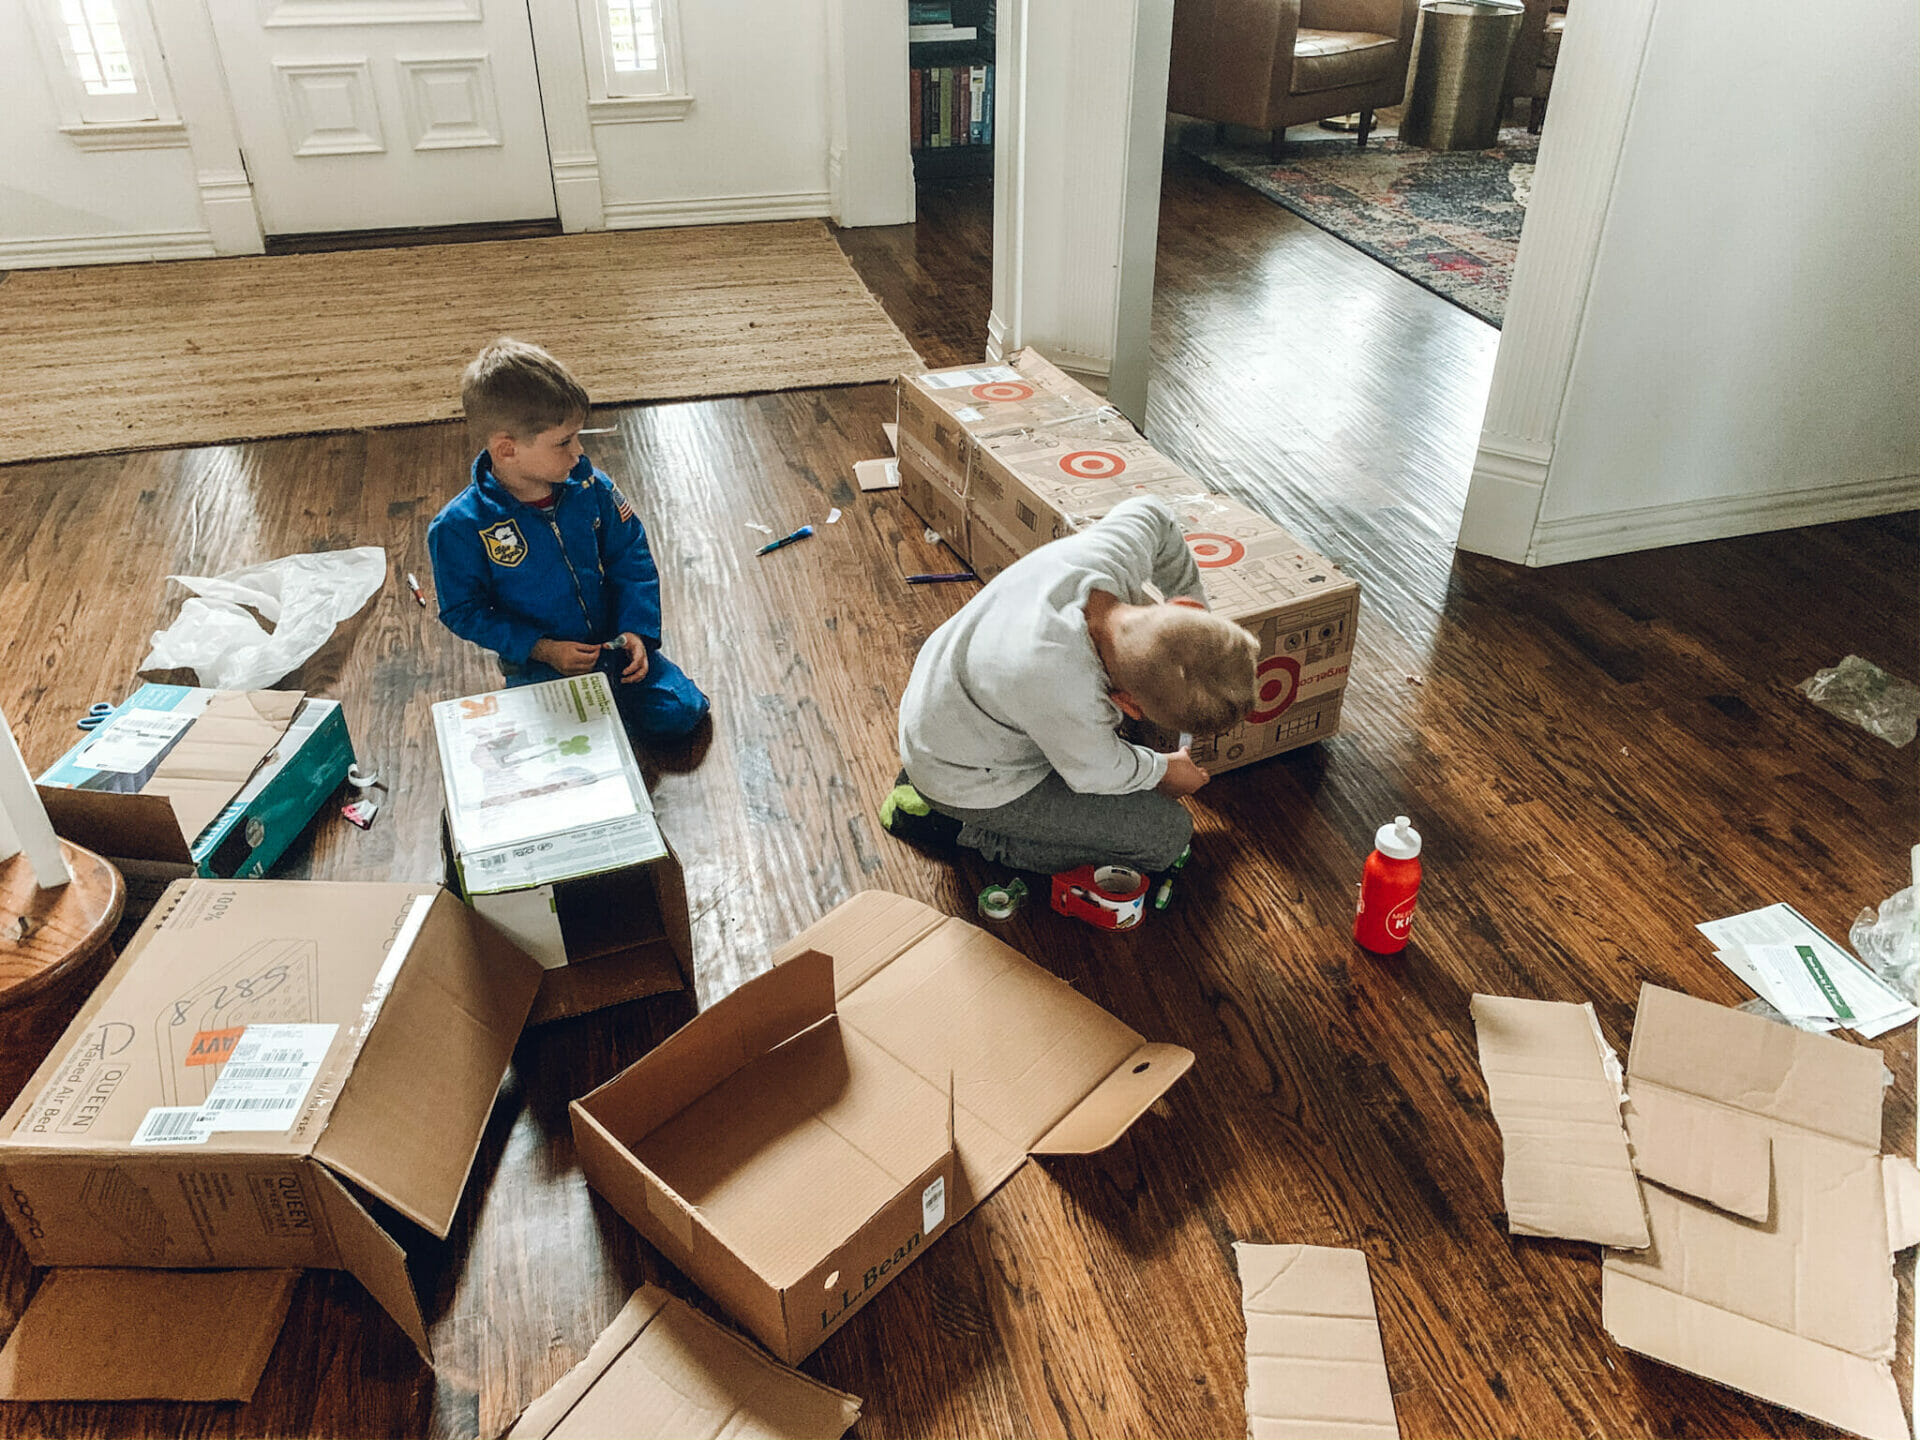 kids taping boxes together